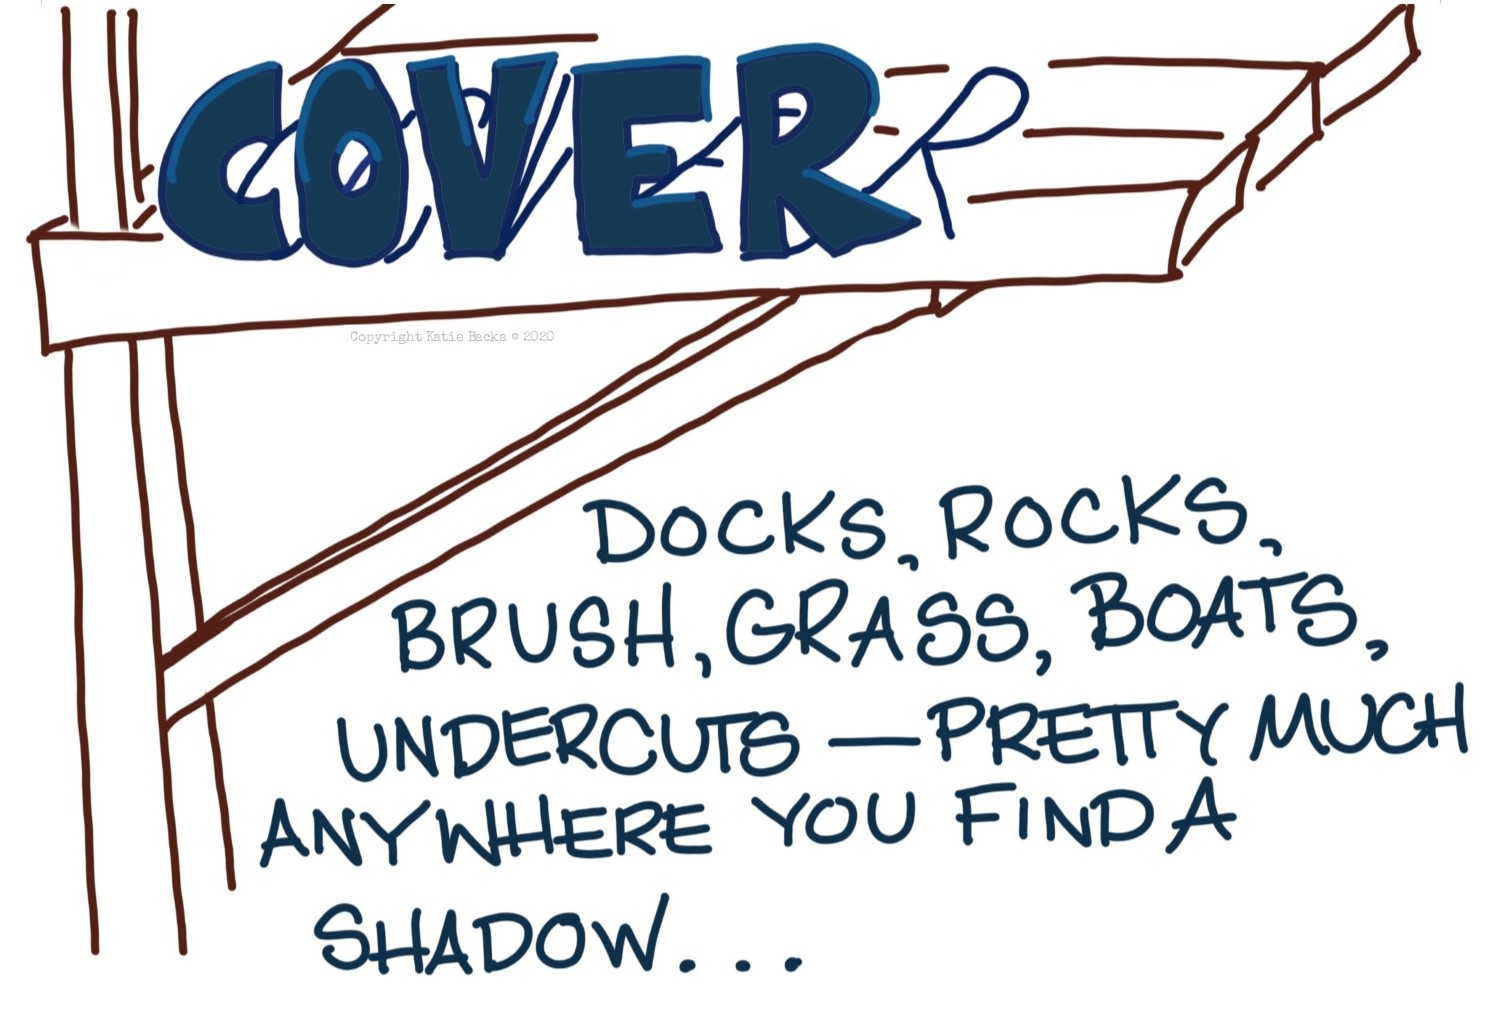 text: cover - docks, rocks, brush, grass, boats, undercuts - pretty much anywhere you find a shadow...